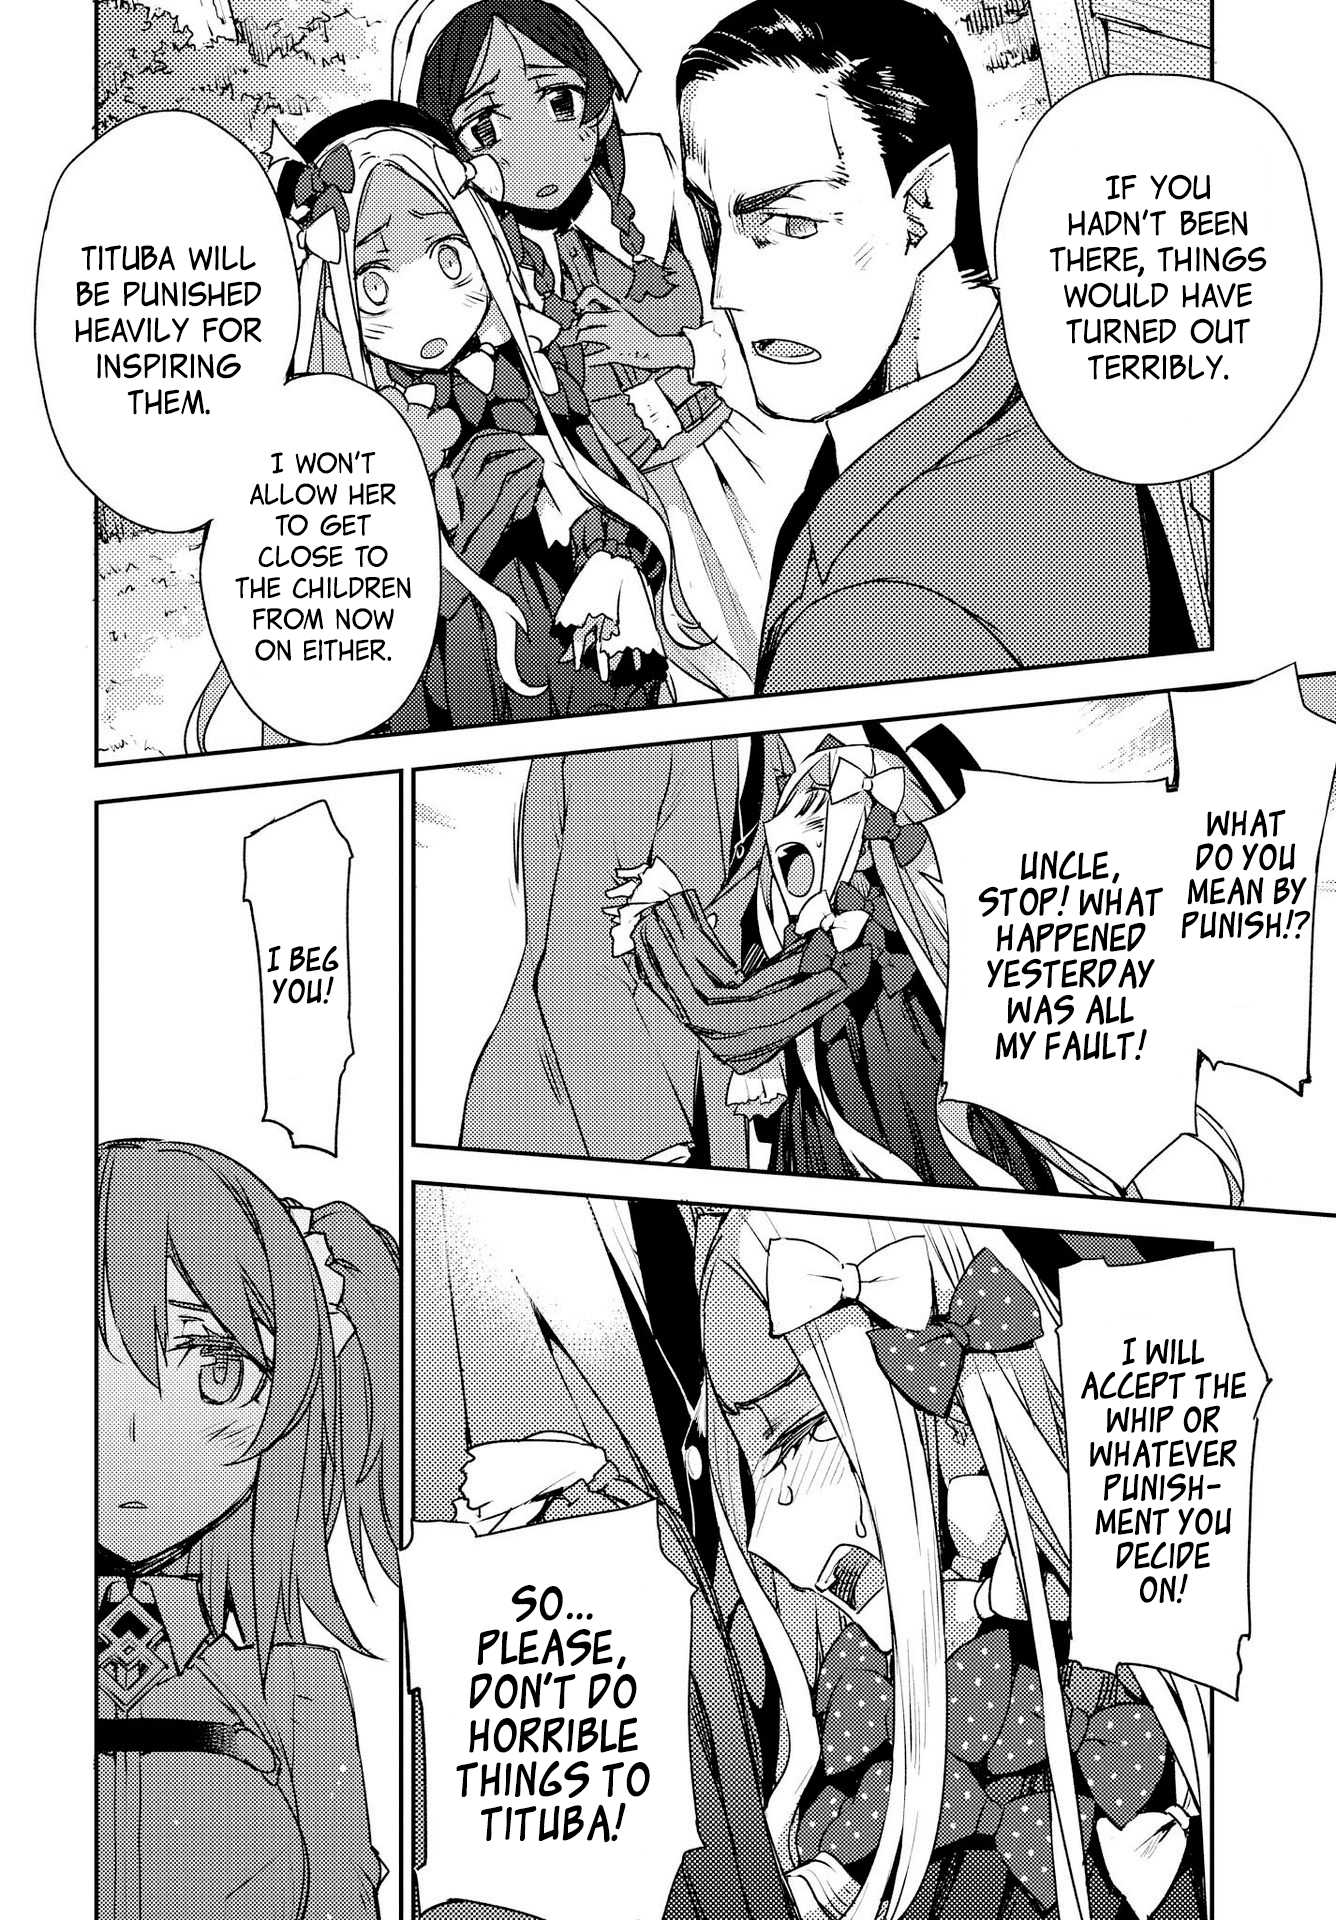 Fate/grand Order: Epic Of Remnant - Subspecies Singularity Iv: Taboo Advent Salem: Salem Of Heresy - 4 page 12